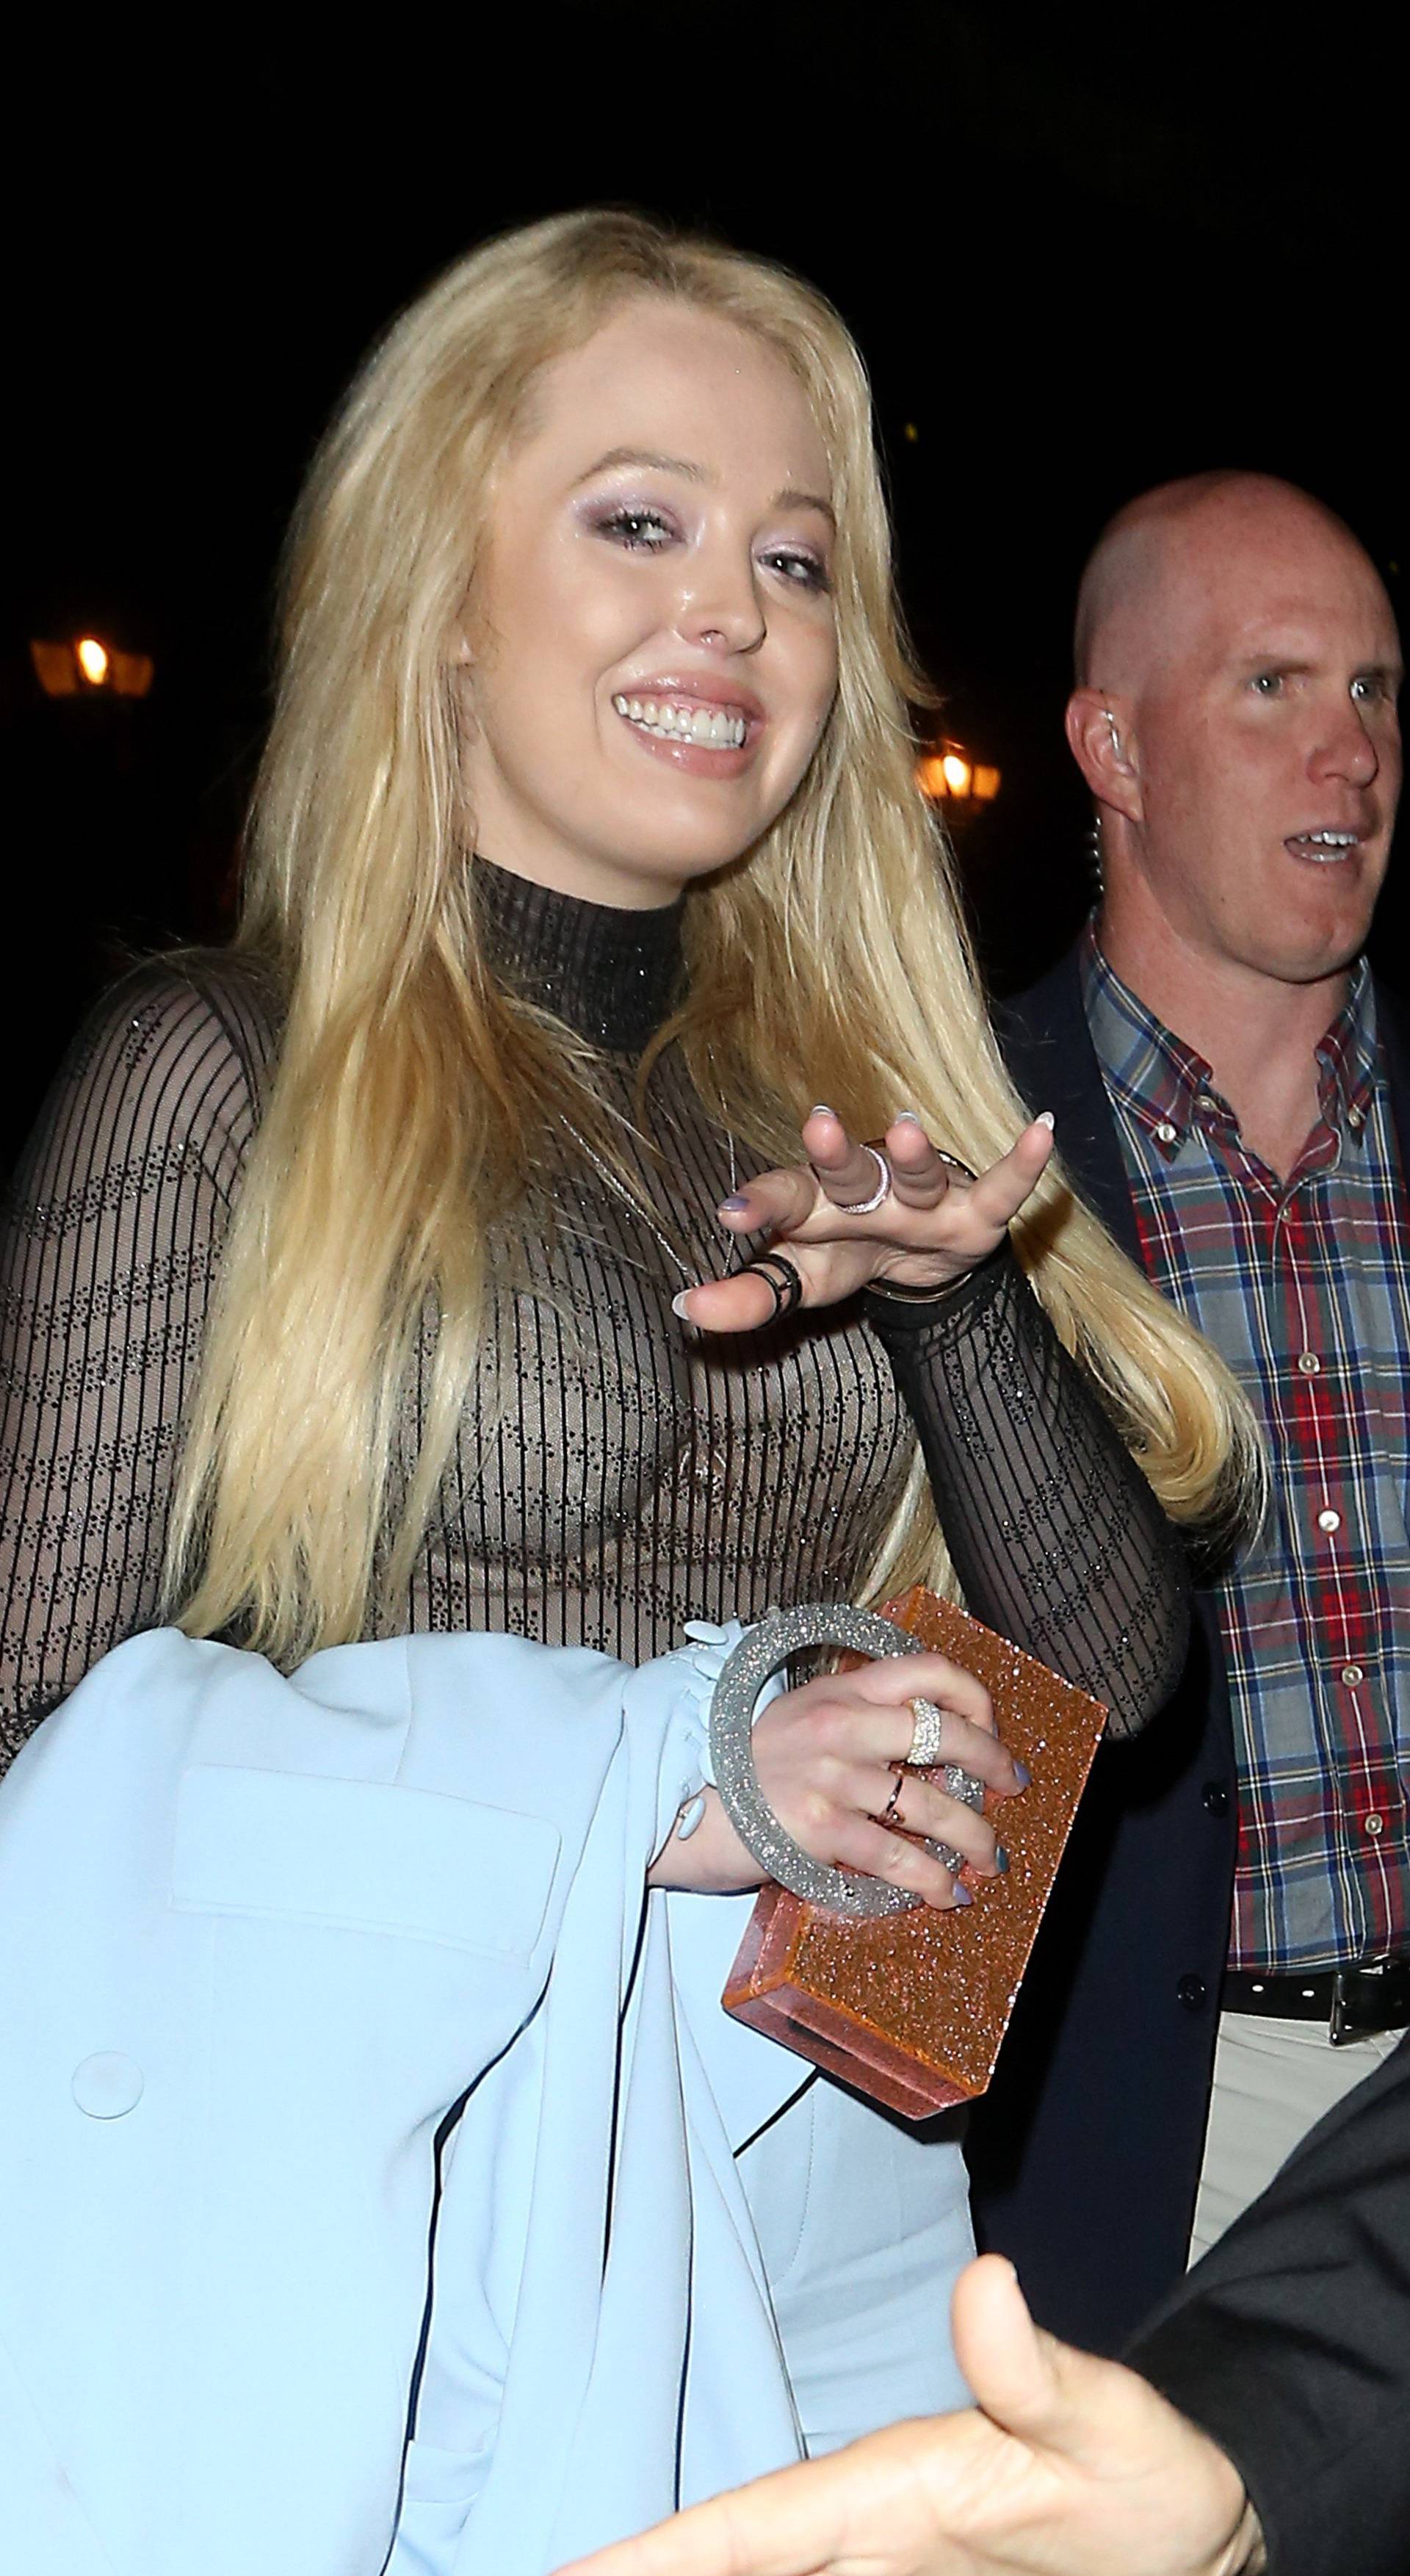 Tiffany Trump enjoys night out in London partying at MNKY HSE until 2am